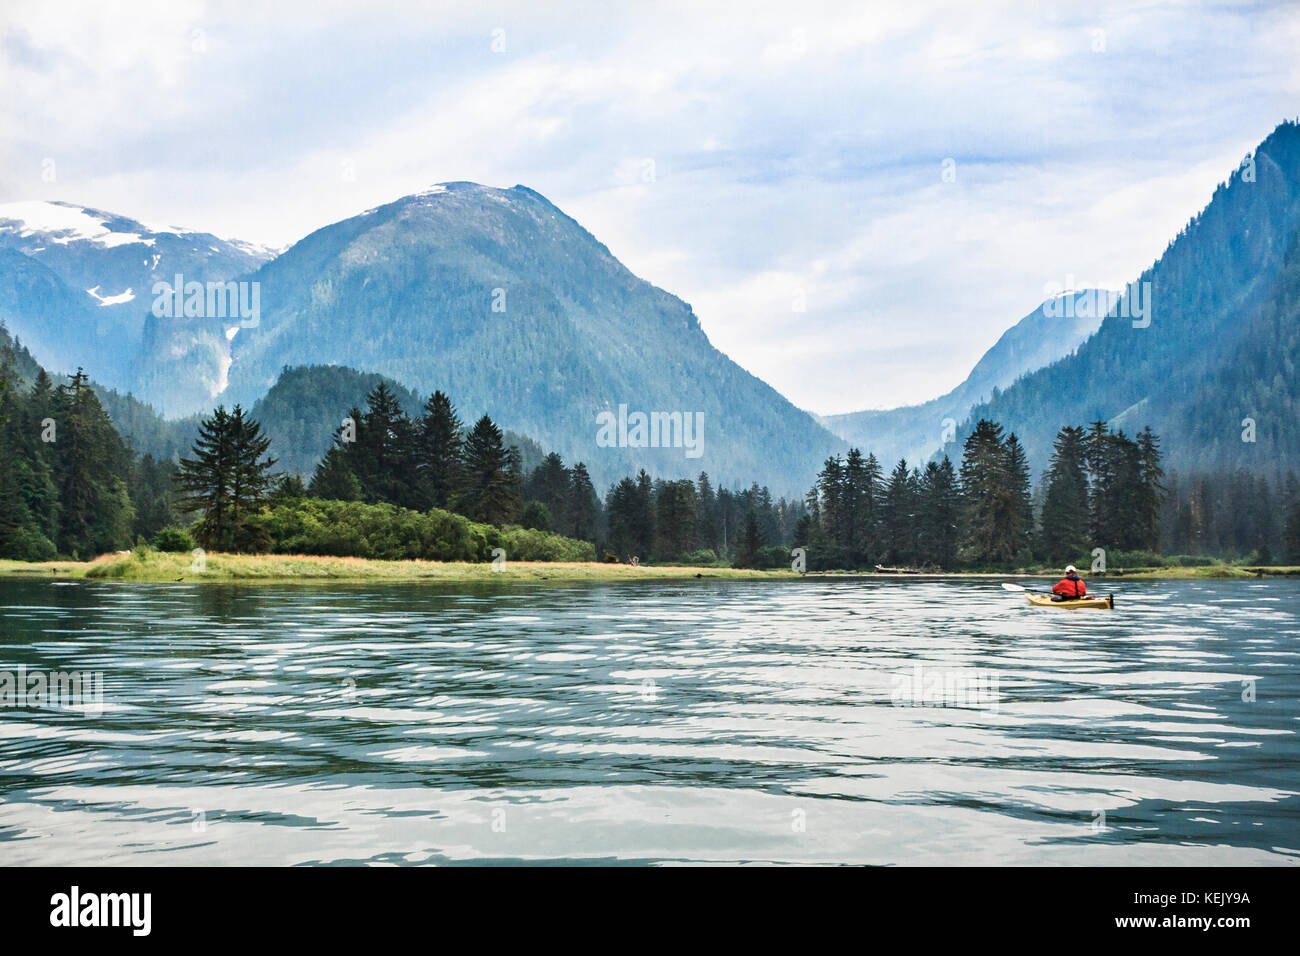 A lone kayaker approaches the river mouth at the head of remote Khutze Inlet, a conservancy area in the Great Bear Rainforest on BC's Inside Passage. Stock Photo